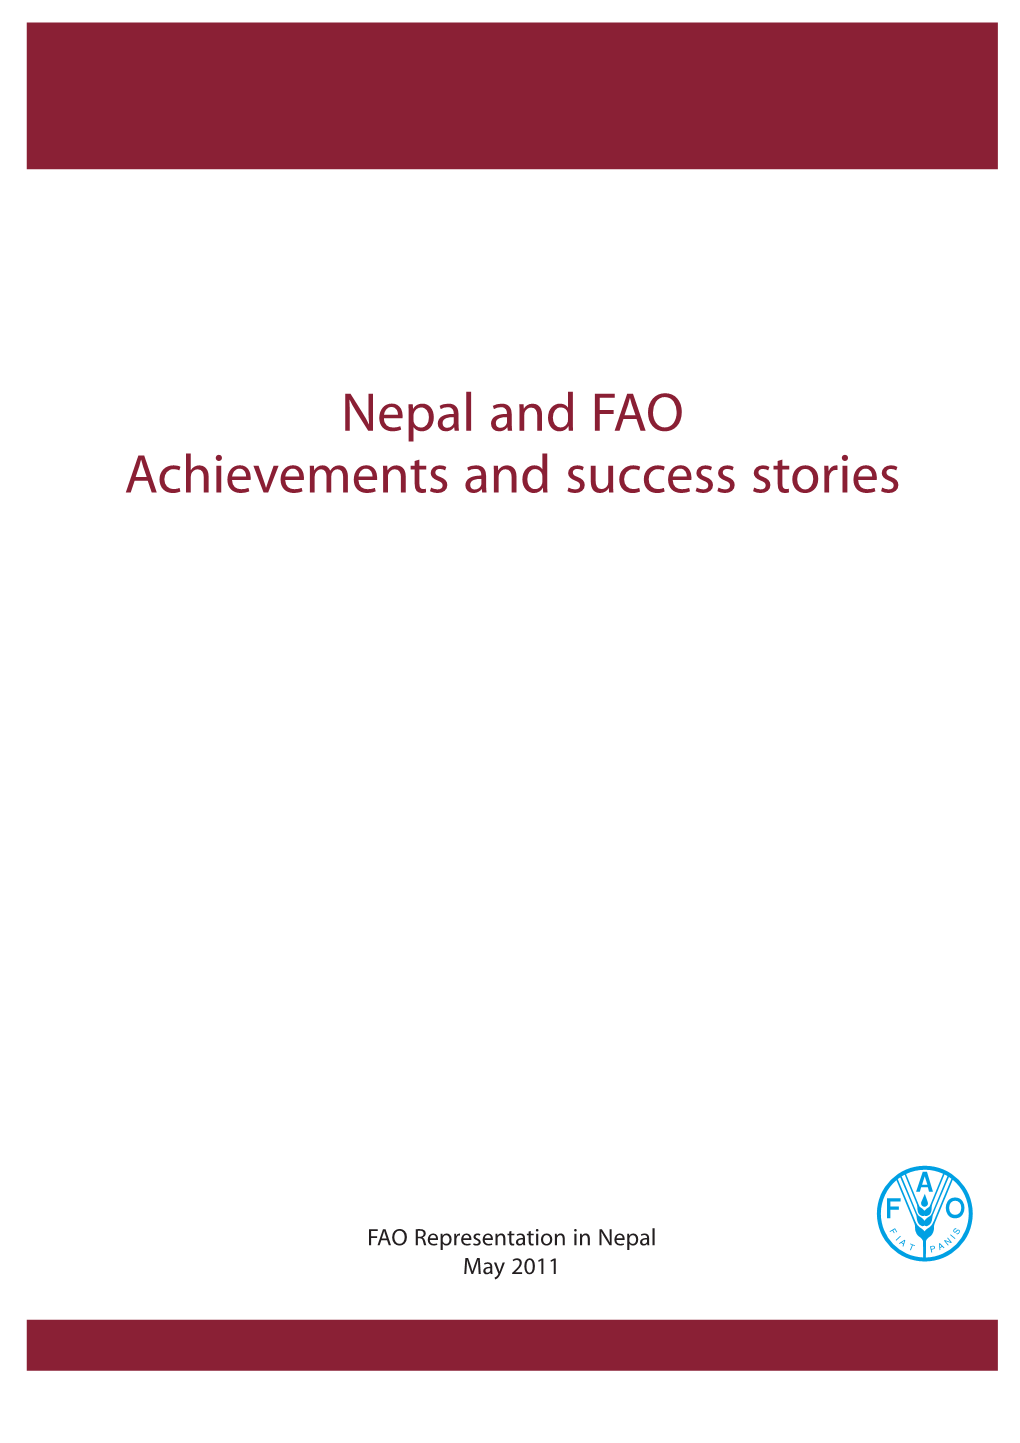 Nepal and FAO Achievements and Success Stories